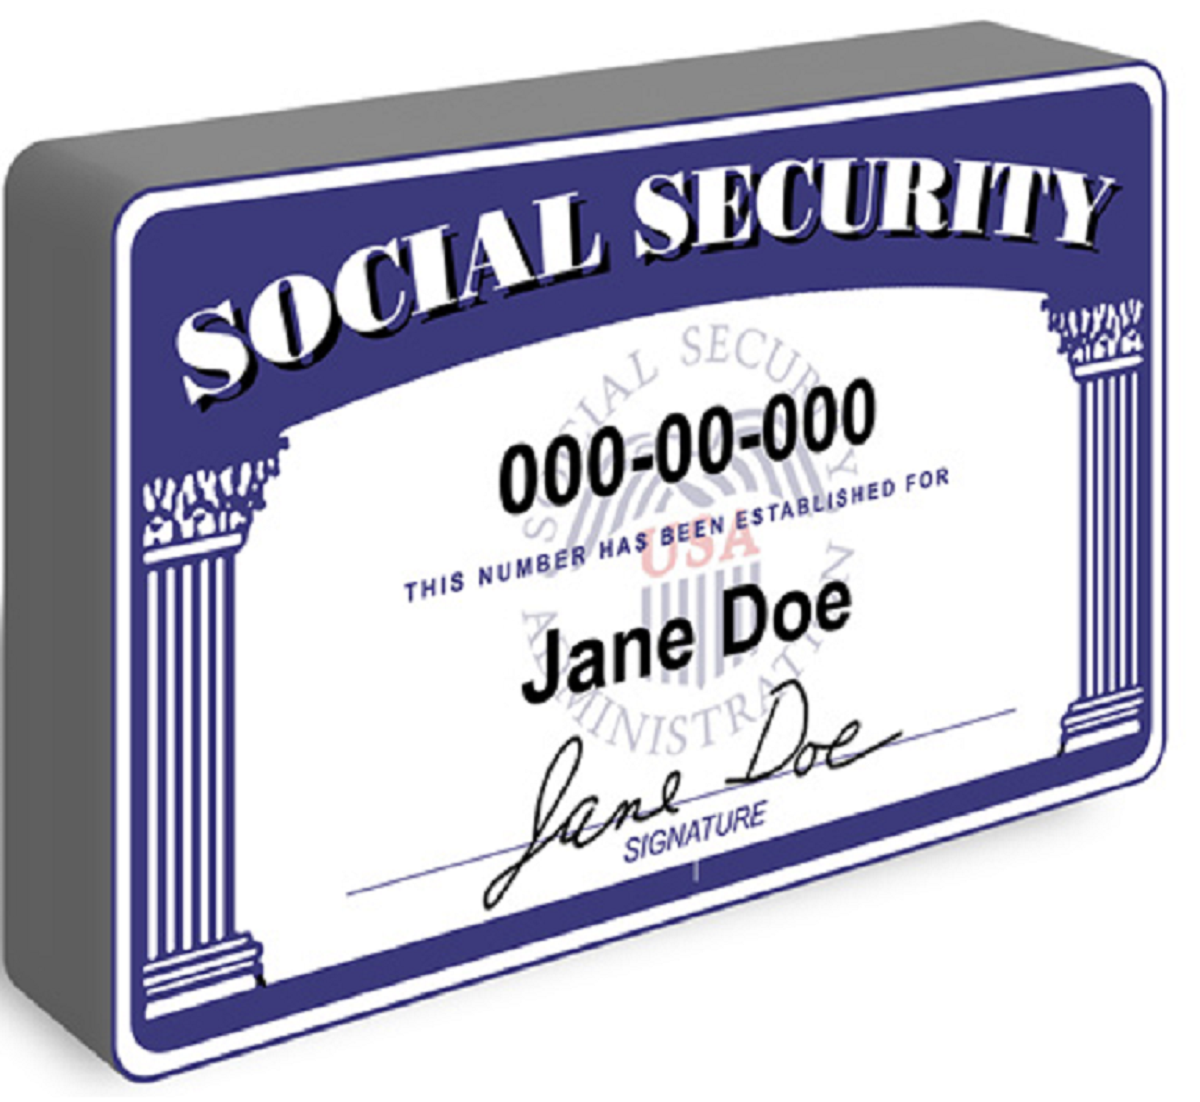  An Image Of Standard Social Security Number Issued To A Citizen Of The USA